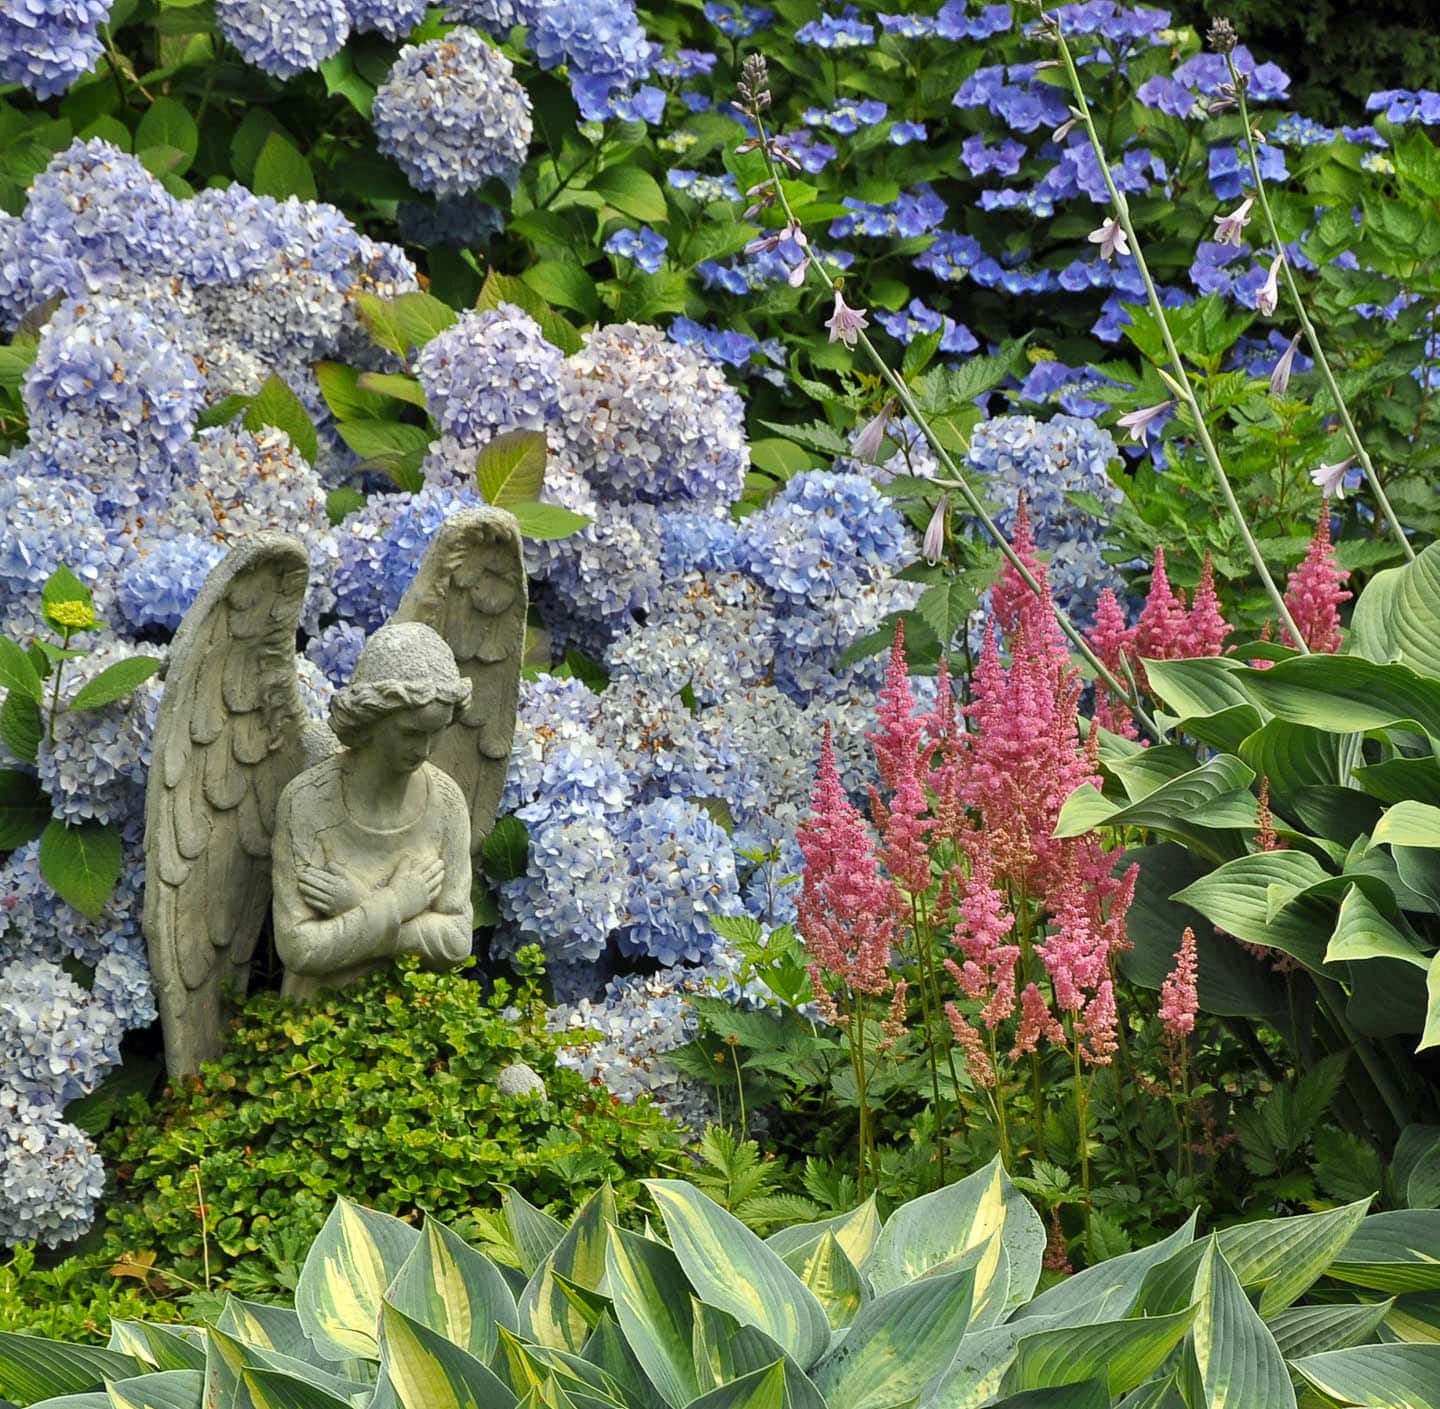 Blue Hydrangeas planted with pink Astilbe and Hostas